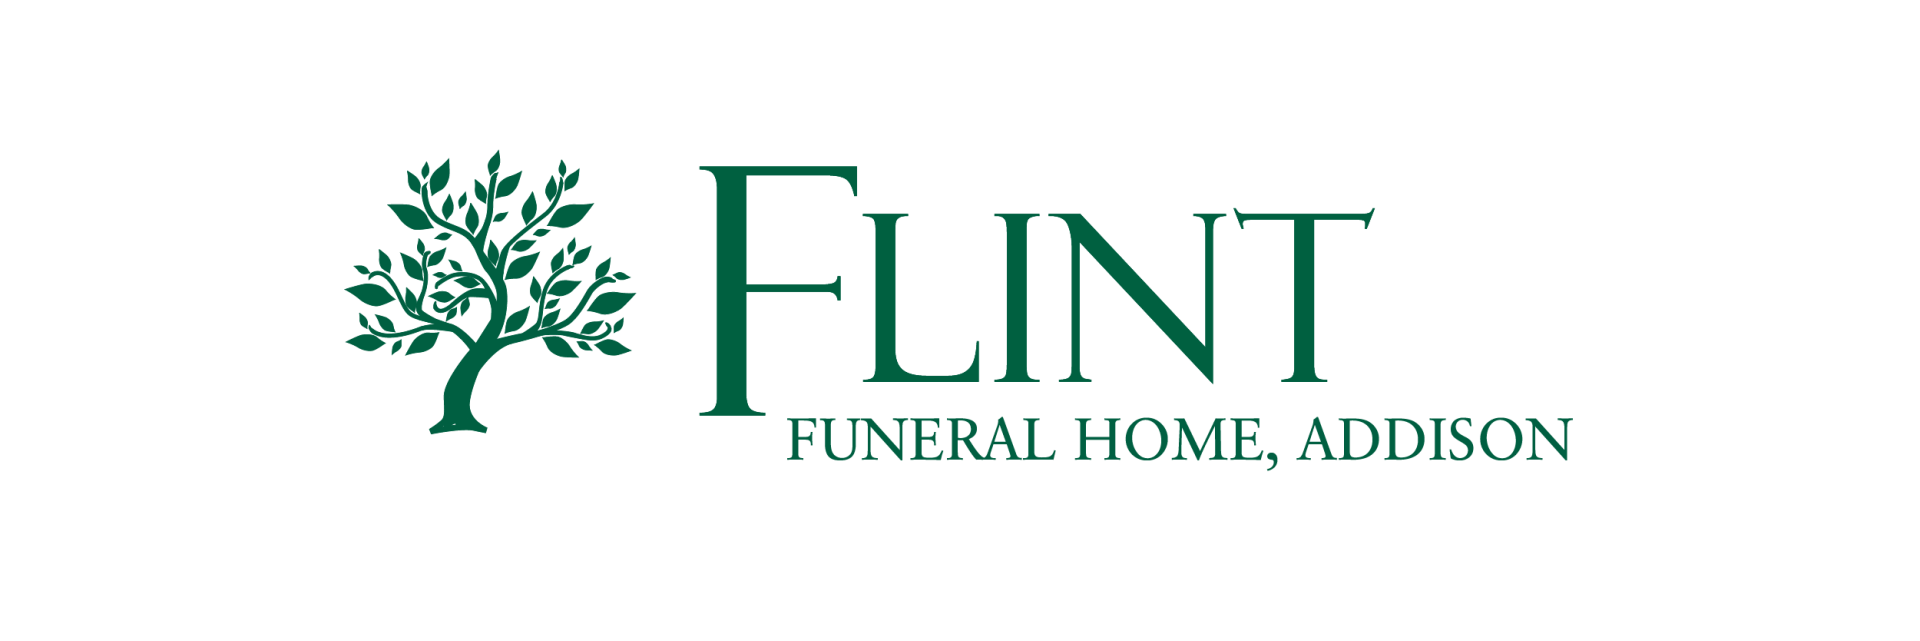 Flint Funeral Home, Addison NY